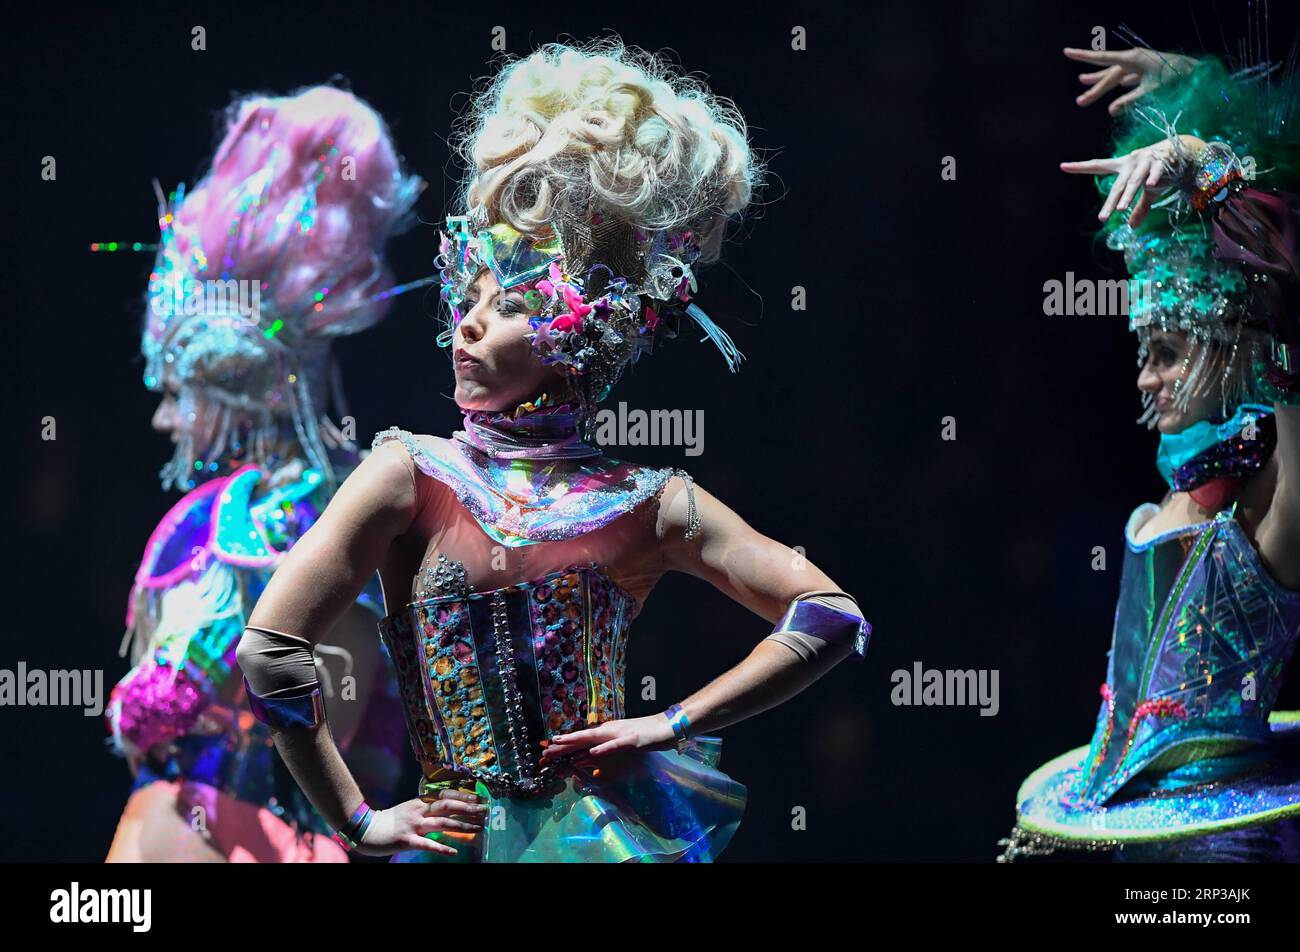 (180928) -- WELLINGTON, Sept. 28, 2018 -- Models present creations during the annual World of Wearable Art Awards Show in Wellington, New Zealand, on Sept. 28, 2018. (Xinhua Photo/)(zhf) NEW ZEALAND-WELLINGTON-WORLD OF WEARABLE ART AWARDS-SHOW GuoxLei PUBLICATIONxNOTxINxCHN Stock Photo